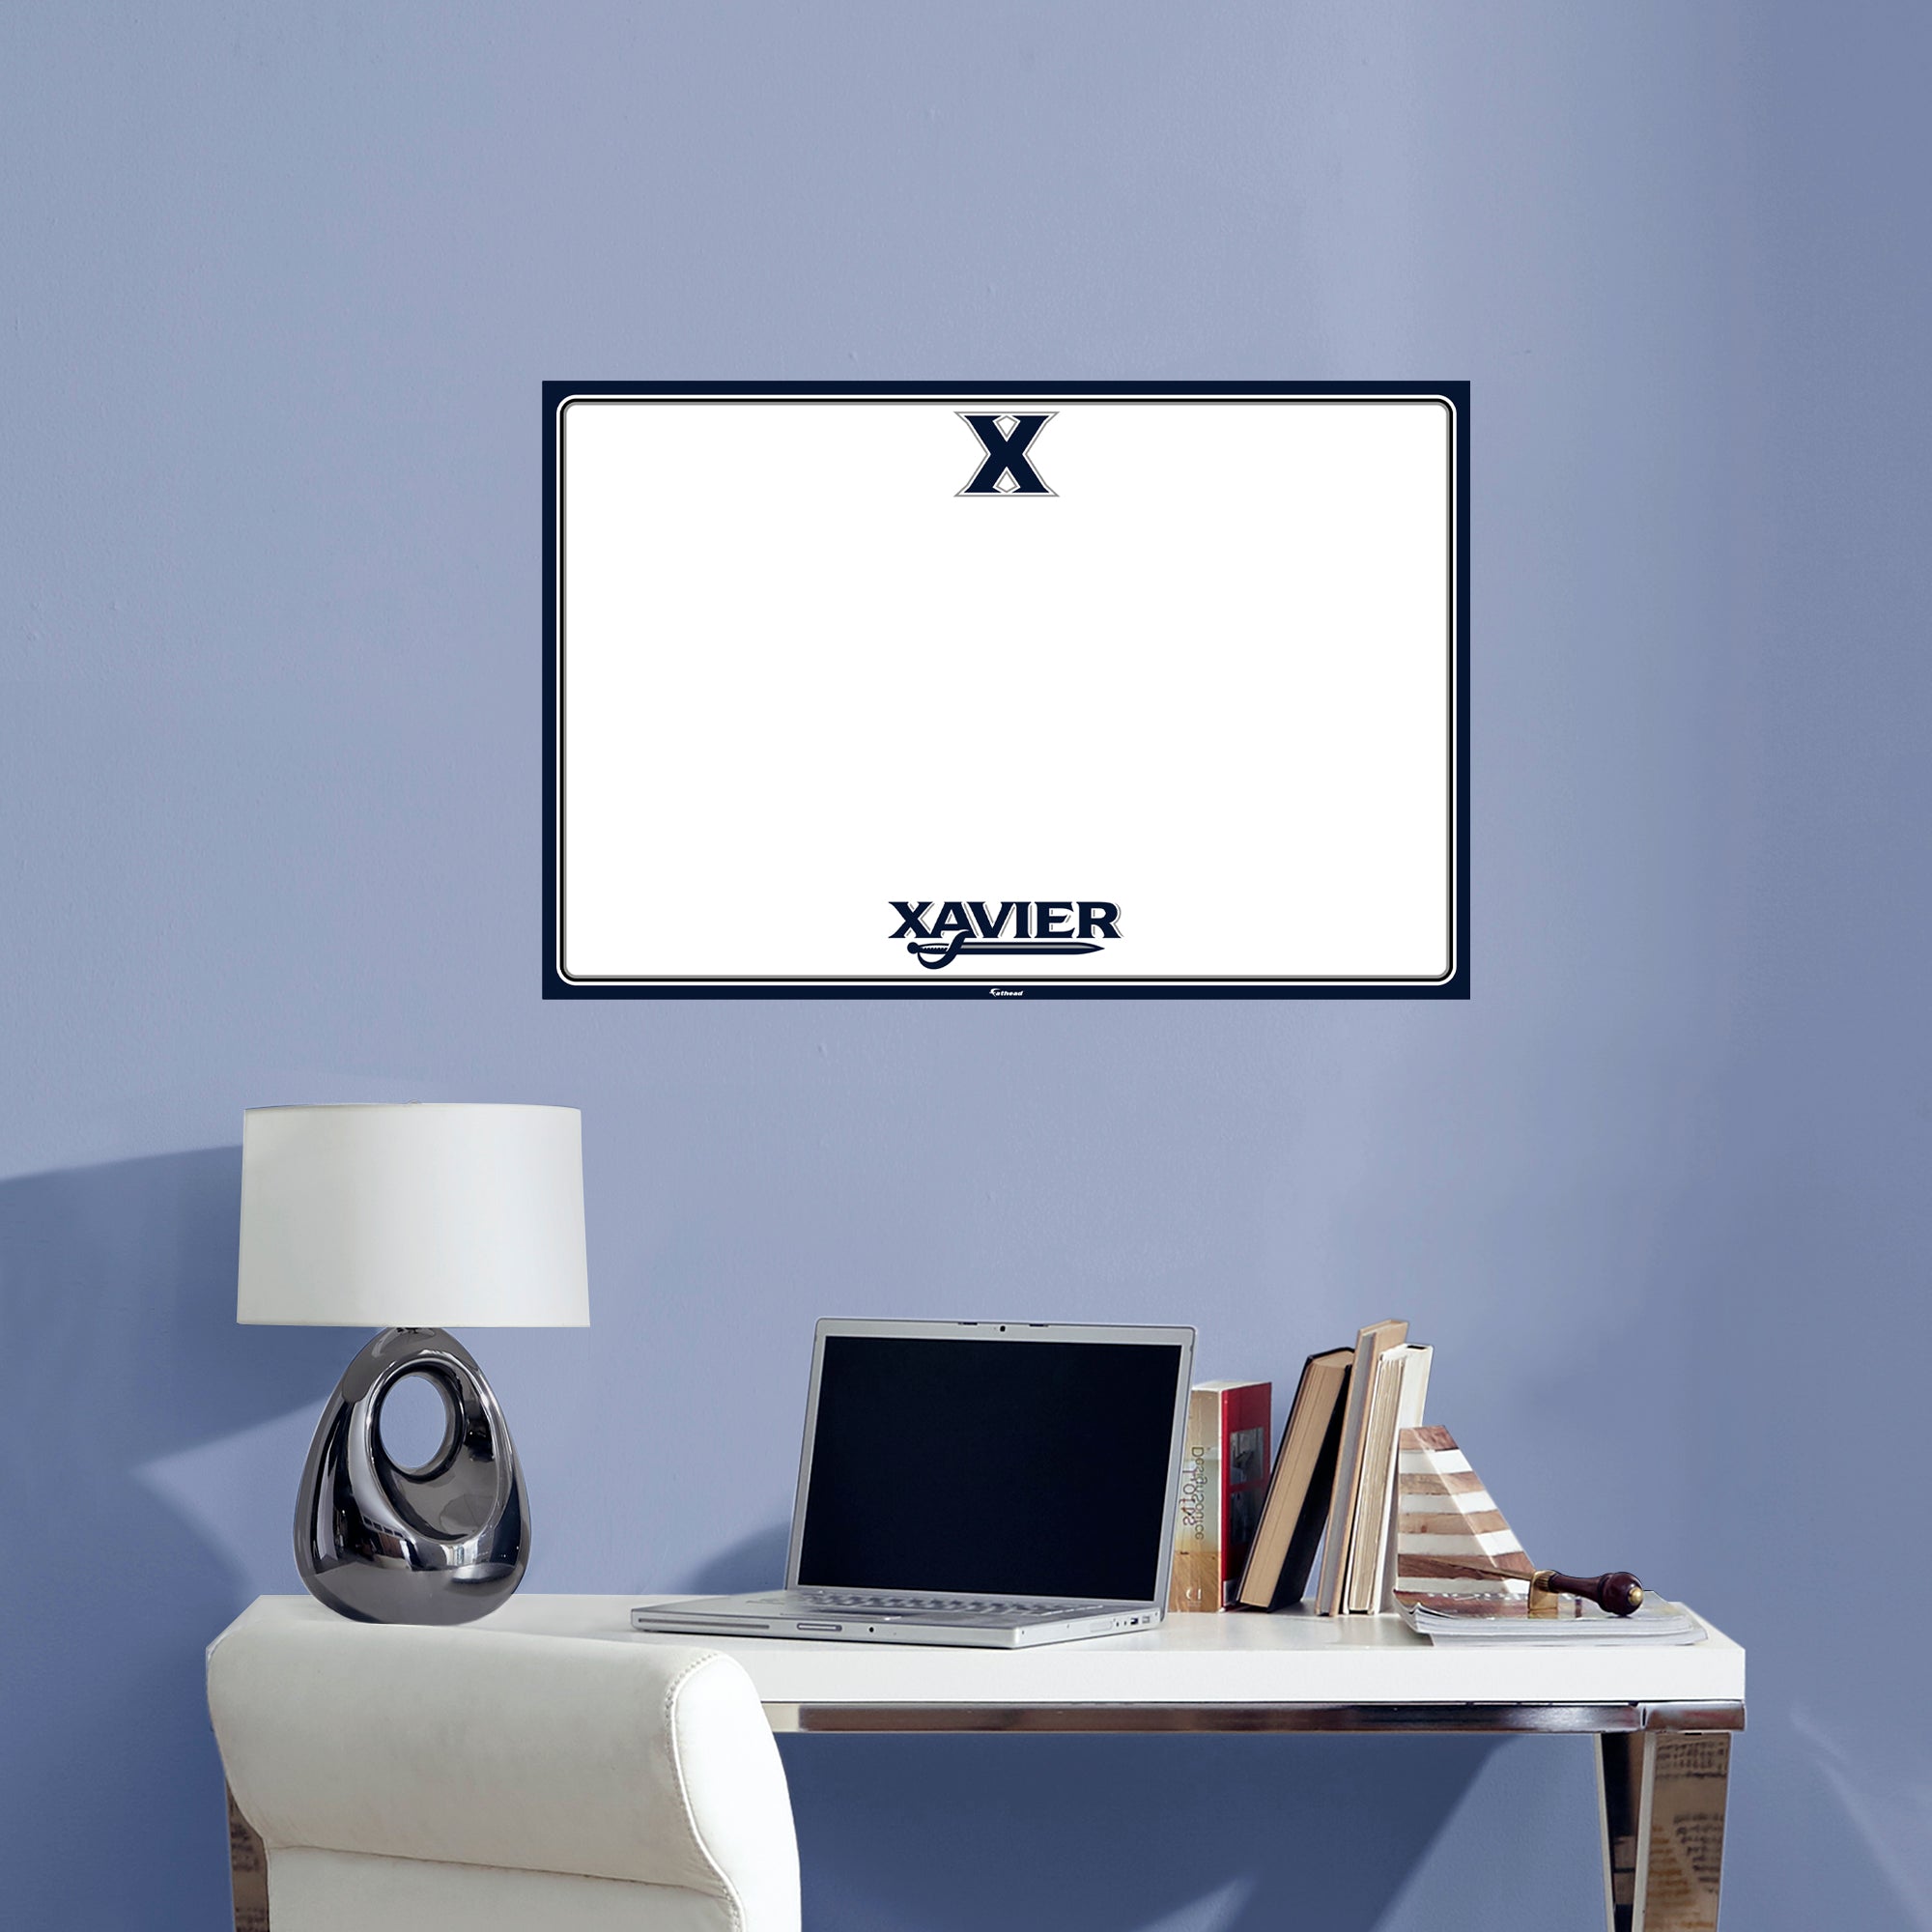 Xavier Musketeers 2020 X-Large Dry Erase Whiteboard - Officially Licensed NCAA Removable Wall Decal XL by Fathead | Vinyl